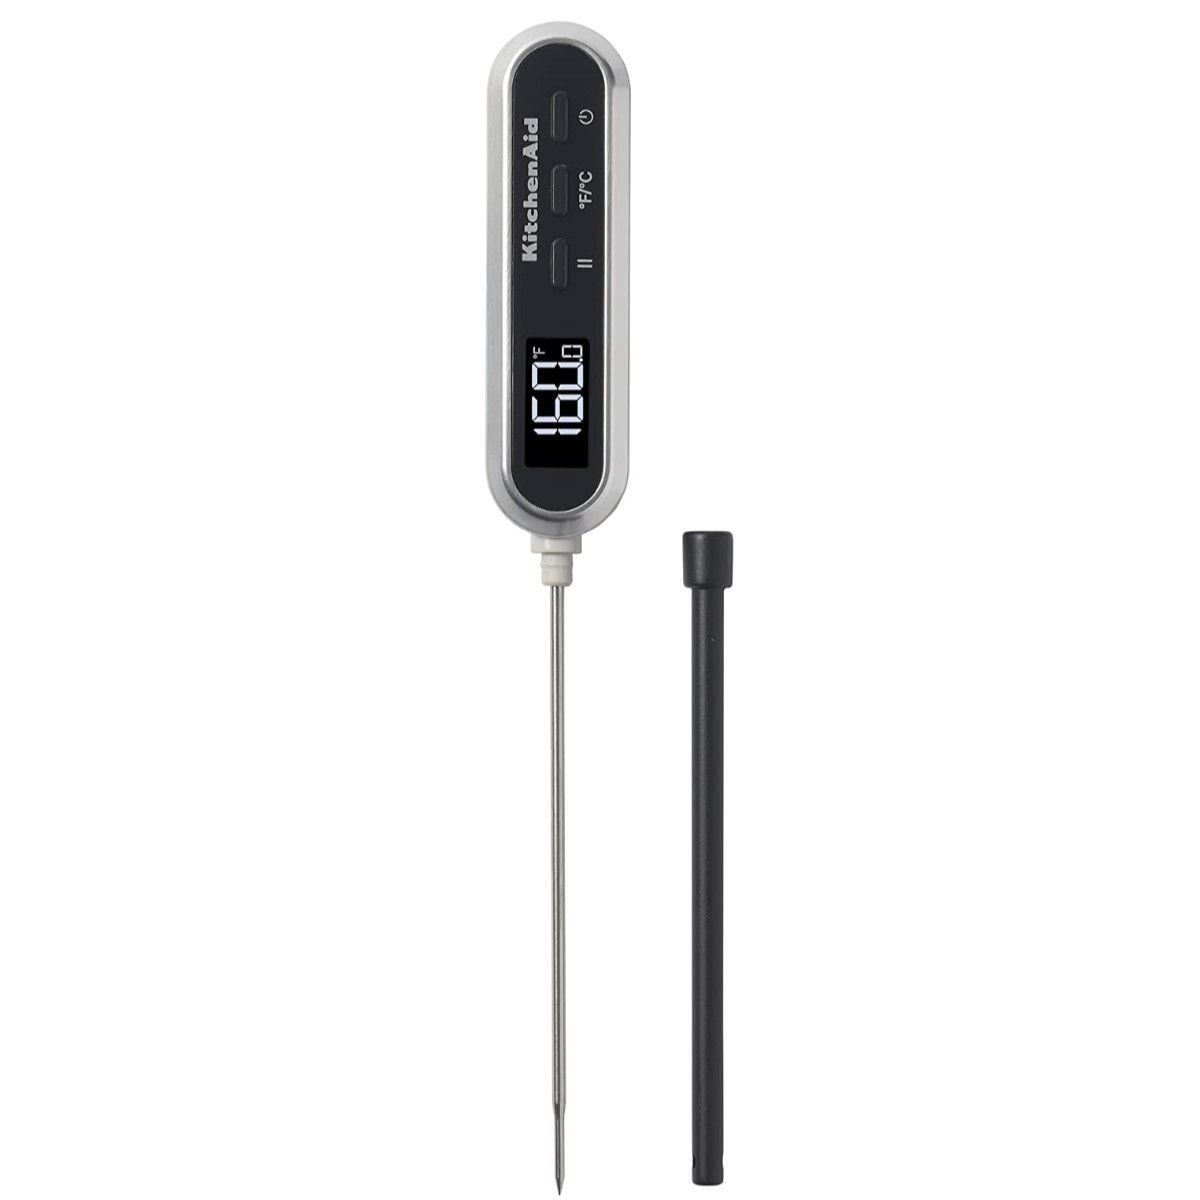 KitchenAid Digital Instant-Read Thermometer with Probe - Shop